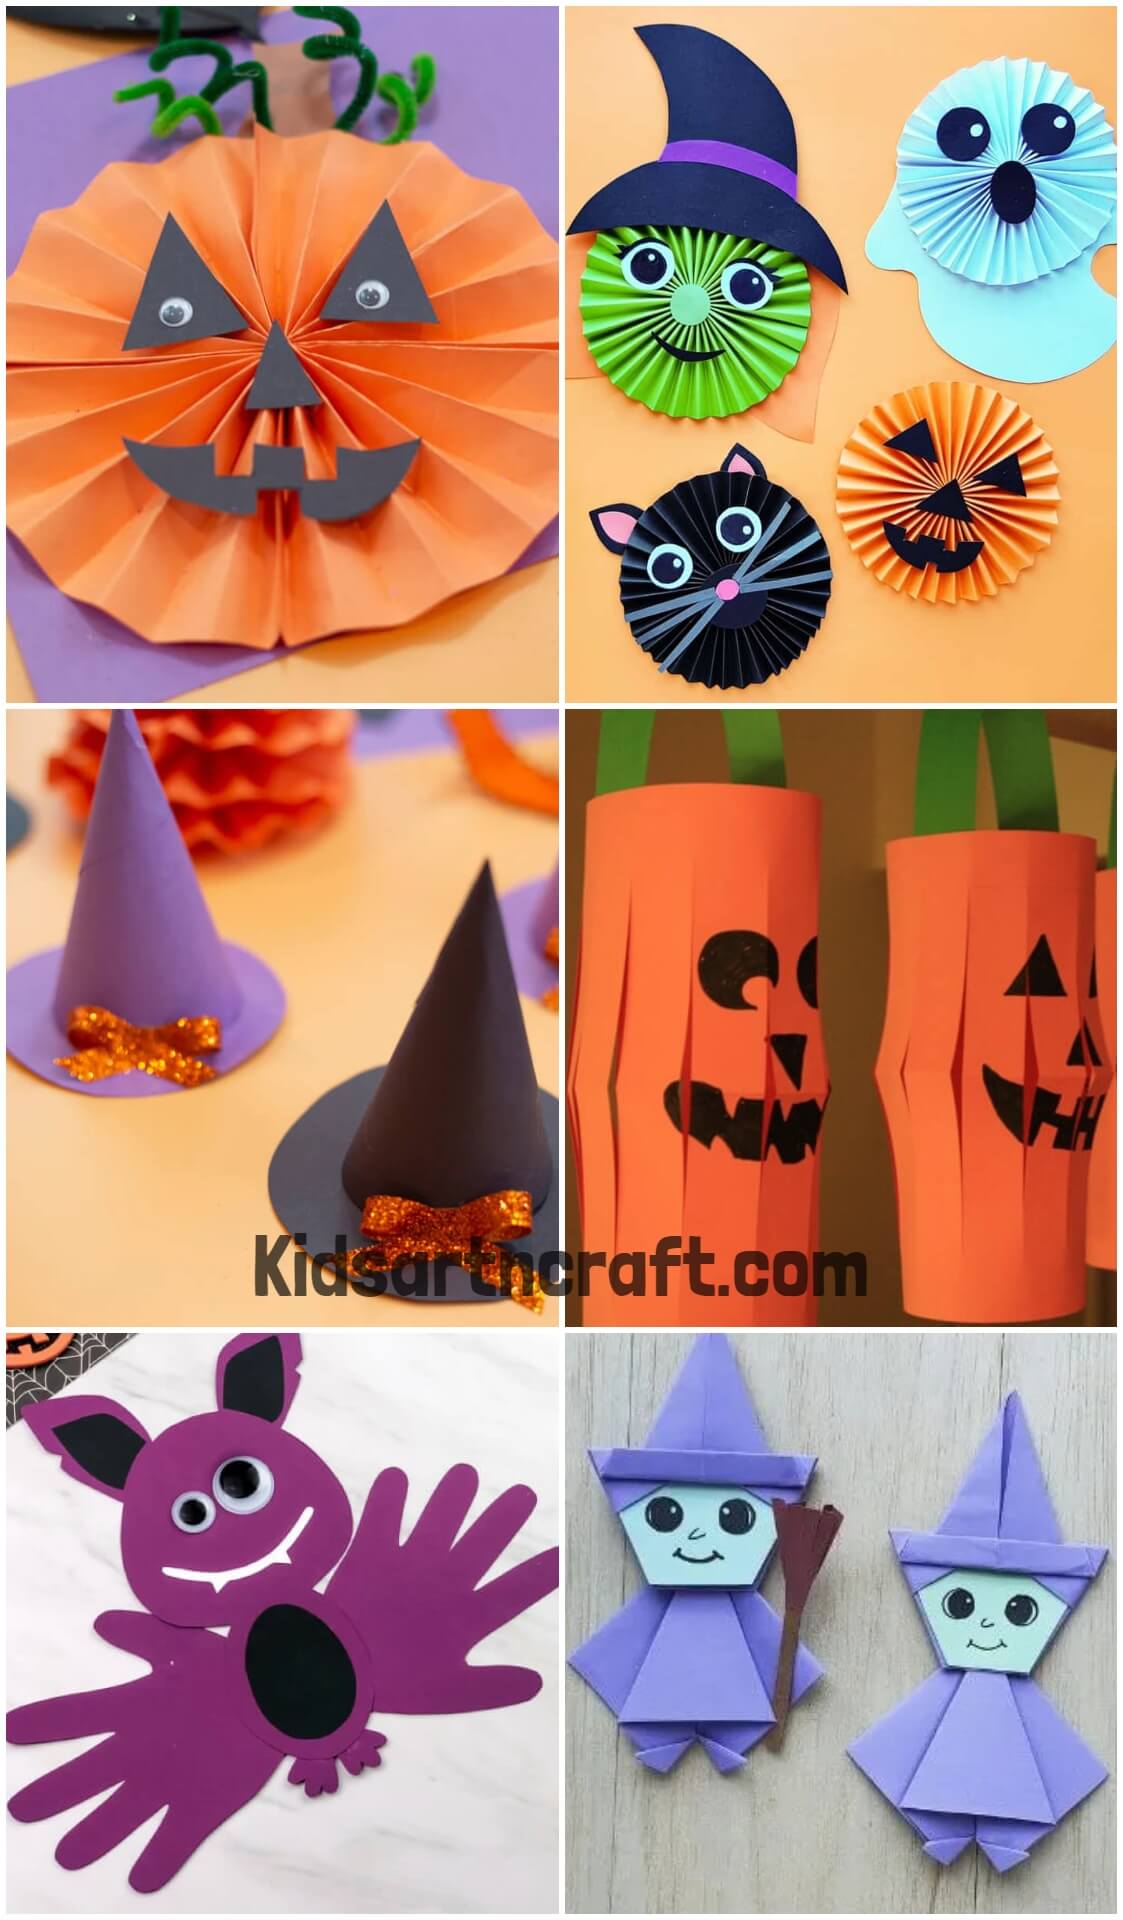 Construction Paper Crafts for Halloween